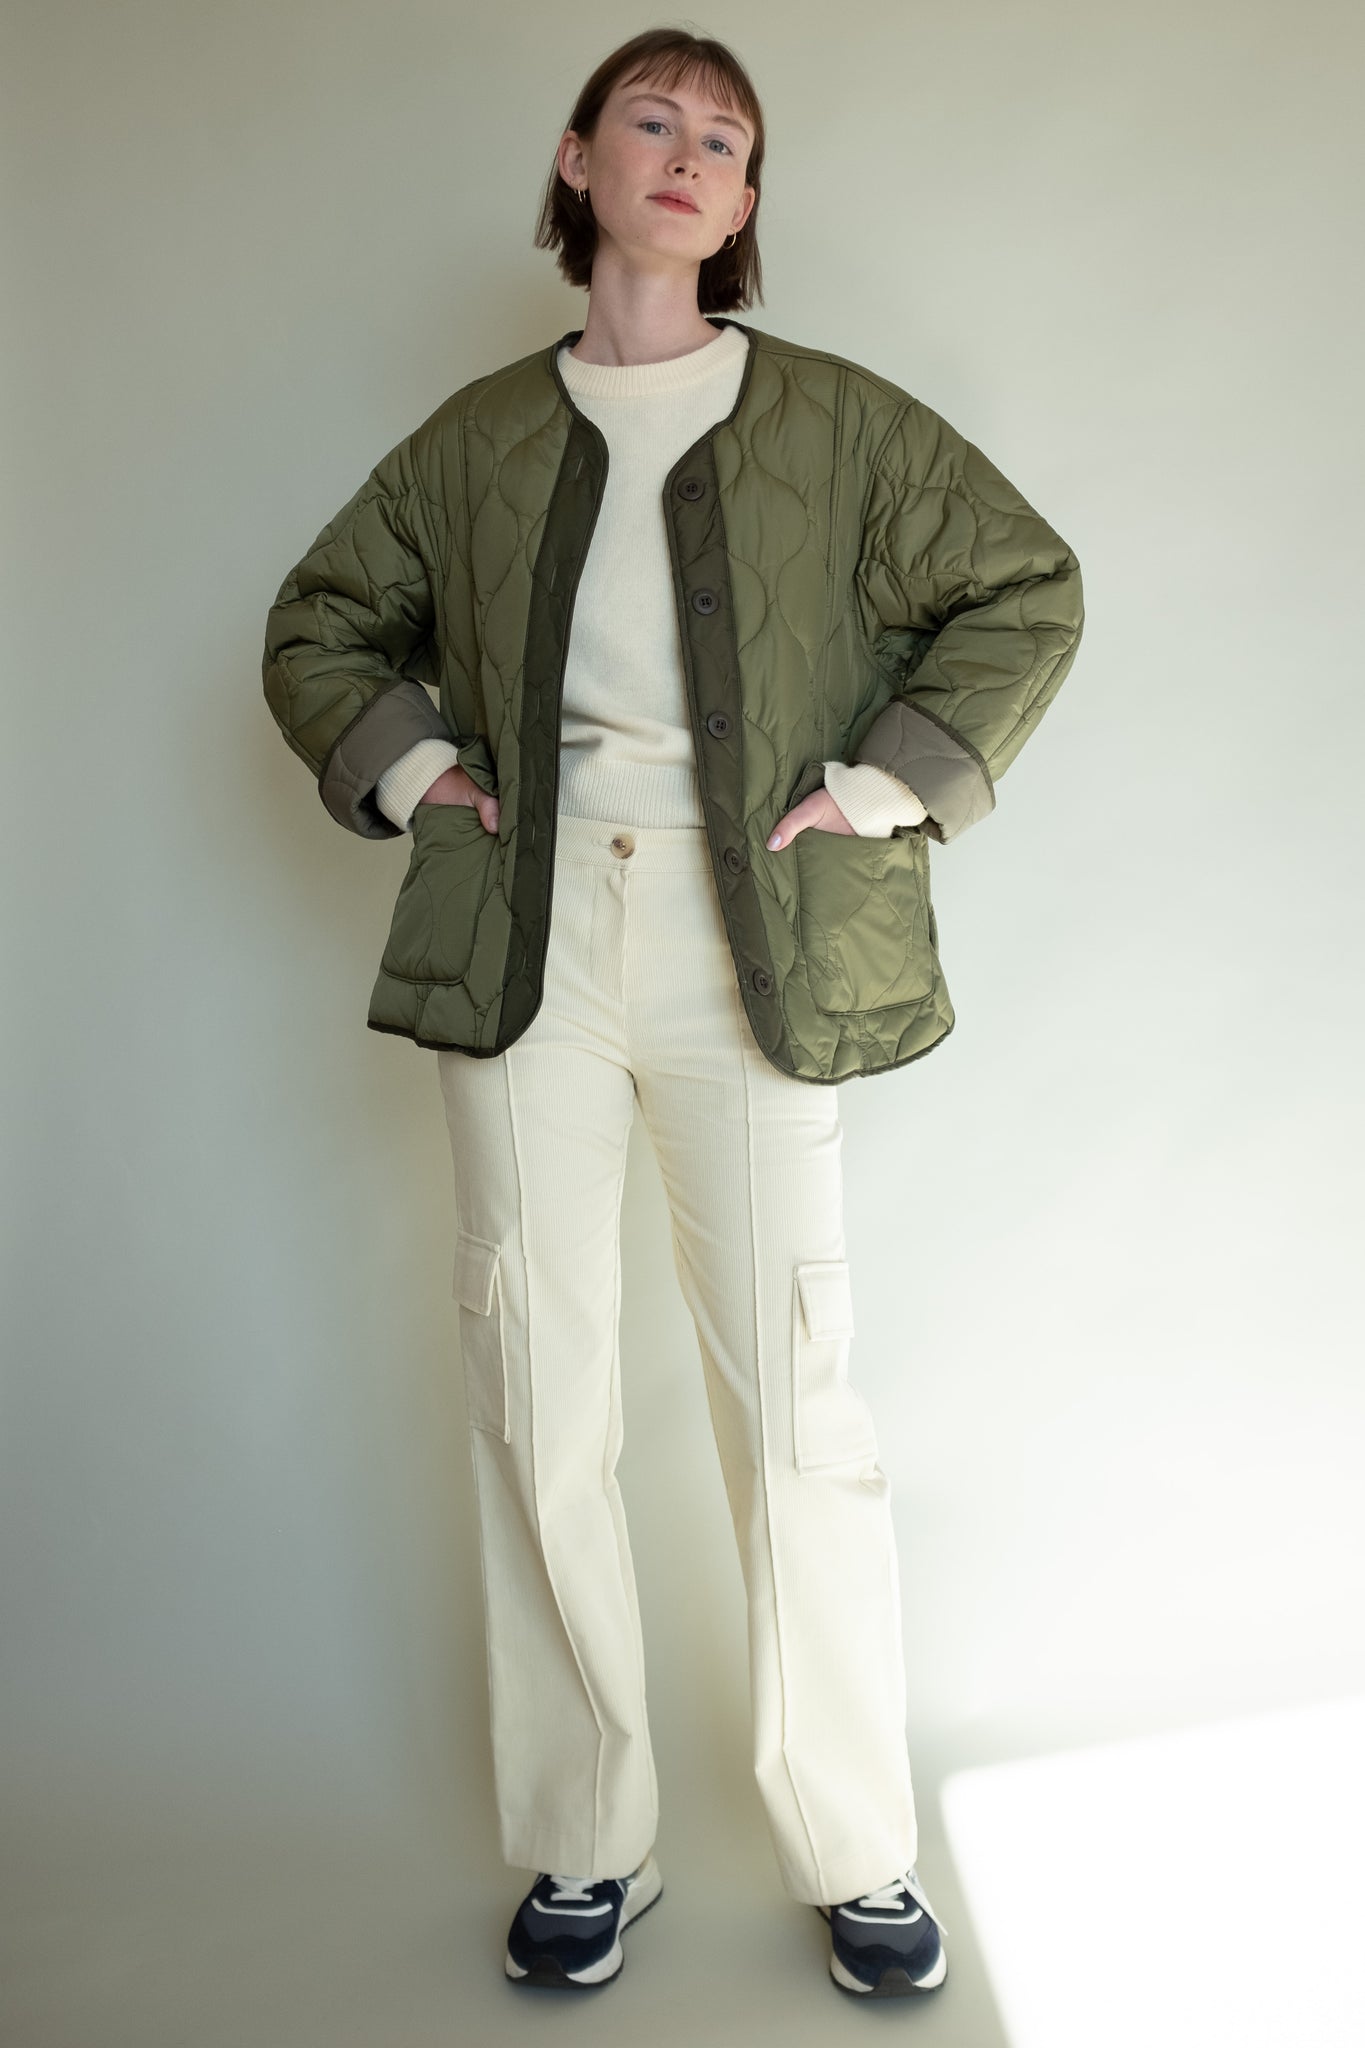 Low rise Corduroy Cargo Pants in Butter Cream